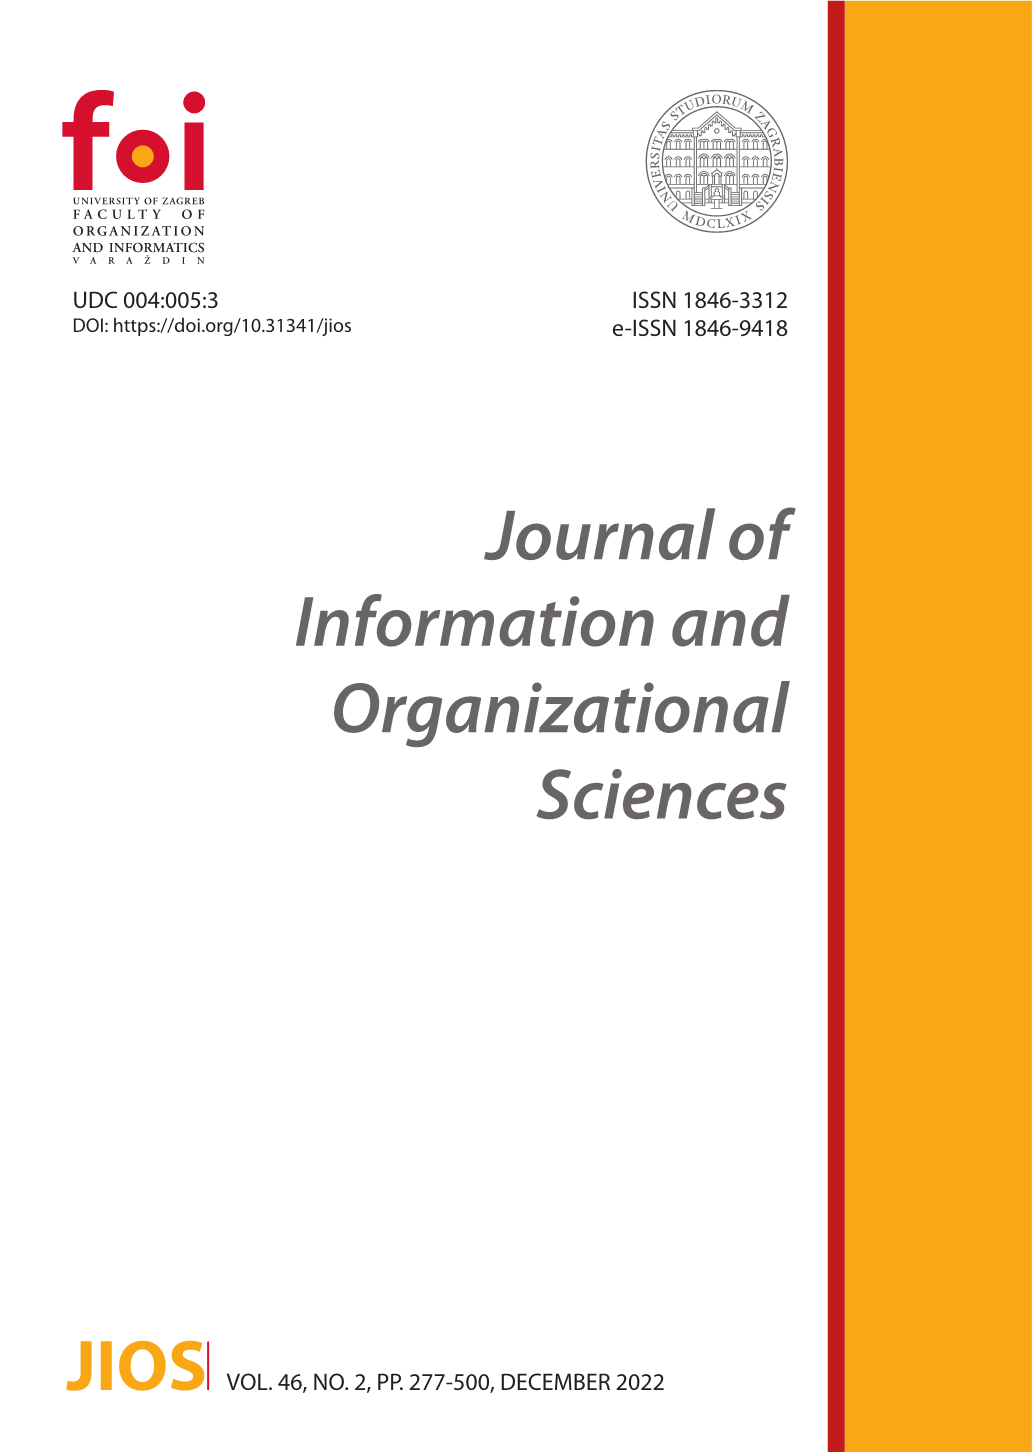 The Relationship of Intergenerational Perceptions of Work Ethics and Workplace Deviation Behaviors in Academic Staff